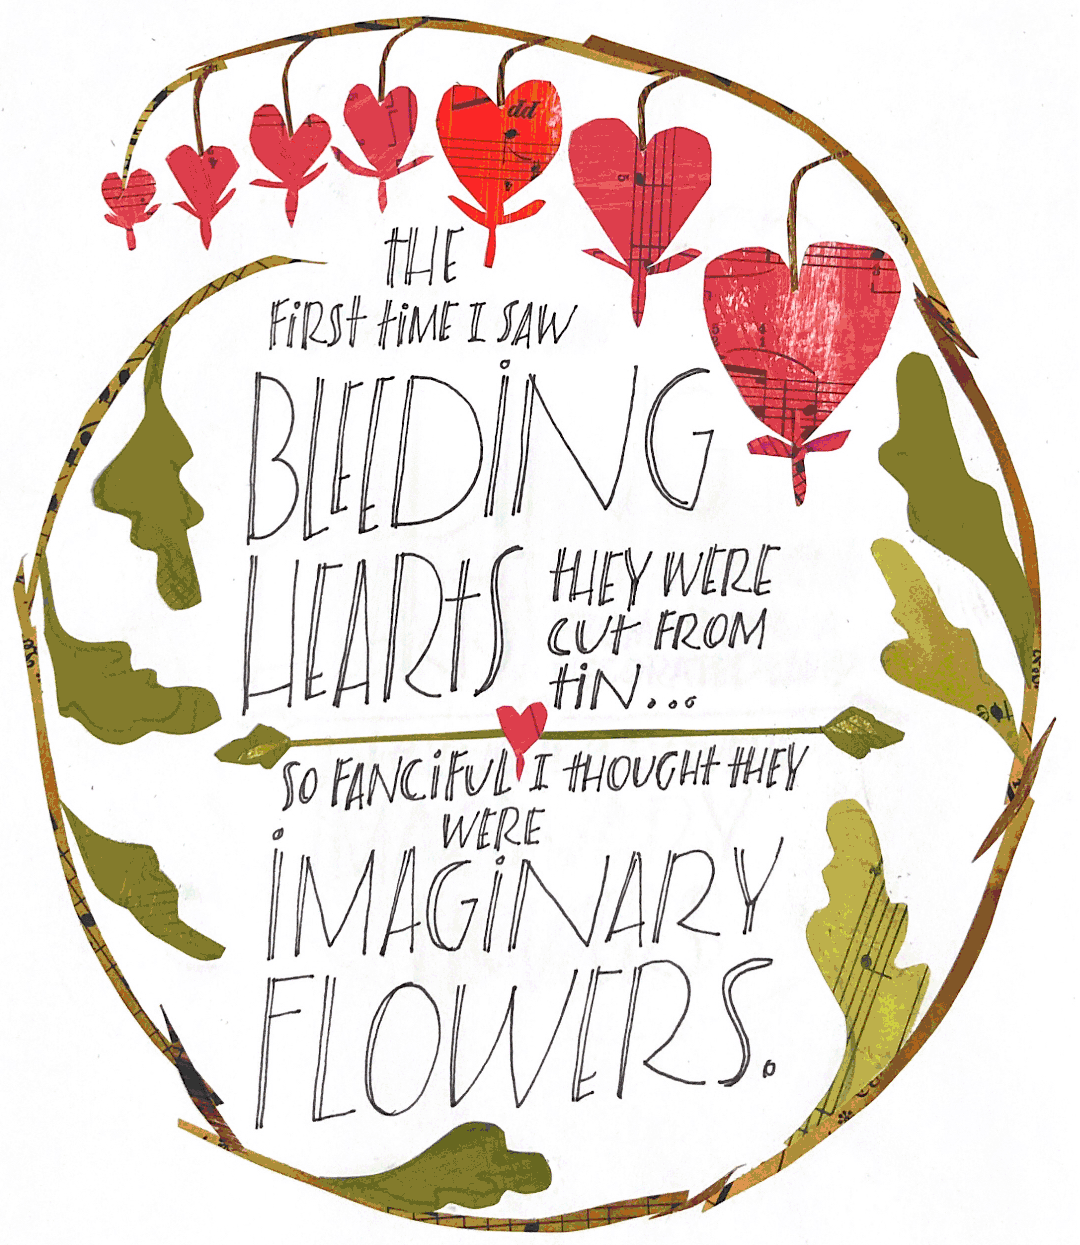 Bleeding hearts collage with handlettered title